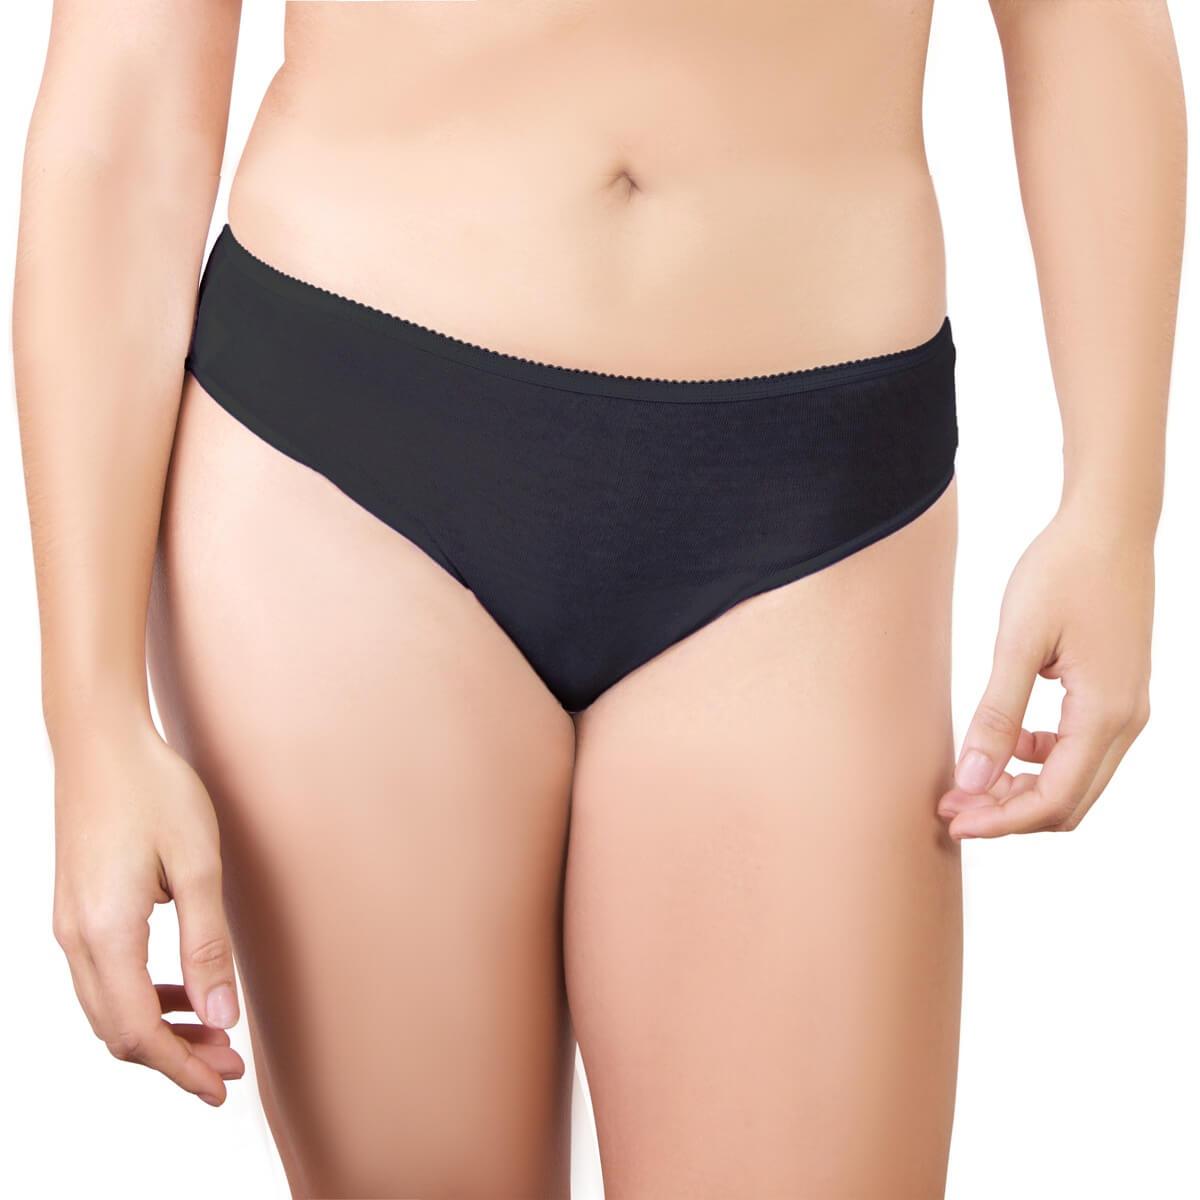  Disposable Panties for Women, Womens Disposable Cotton